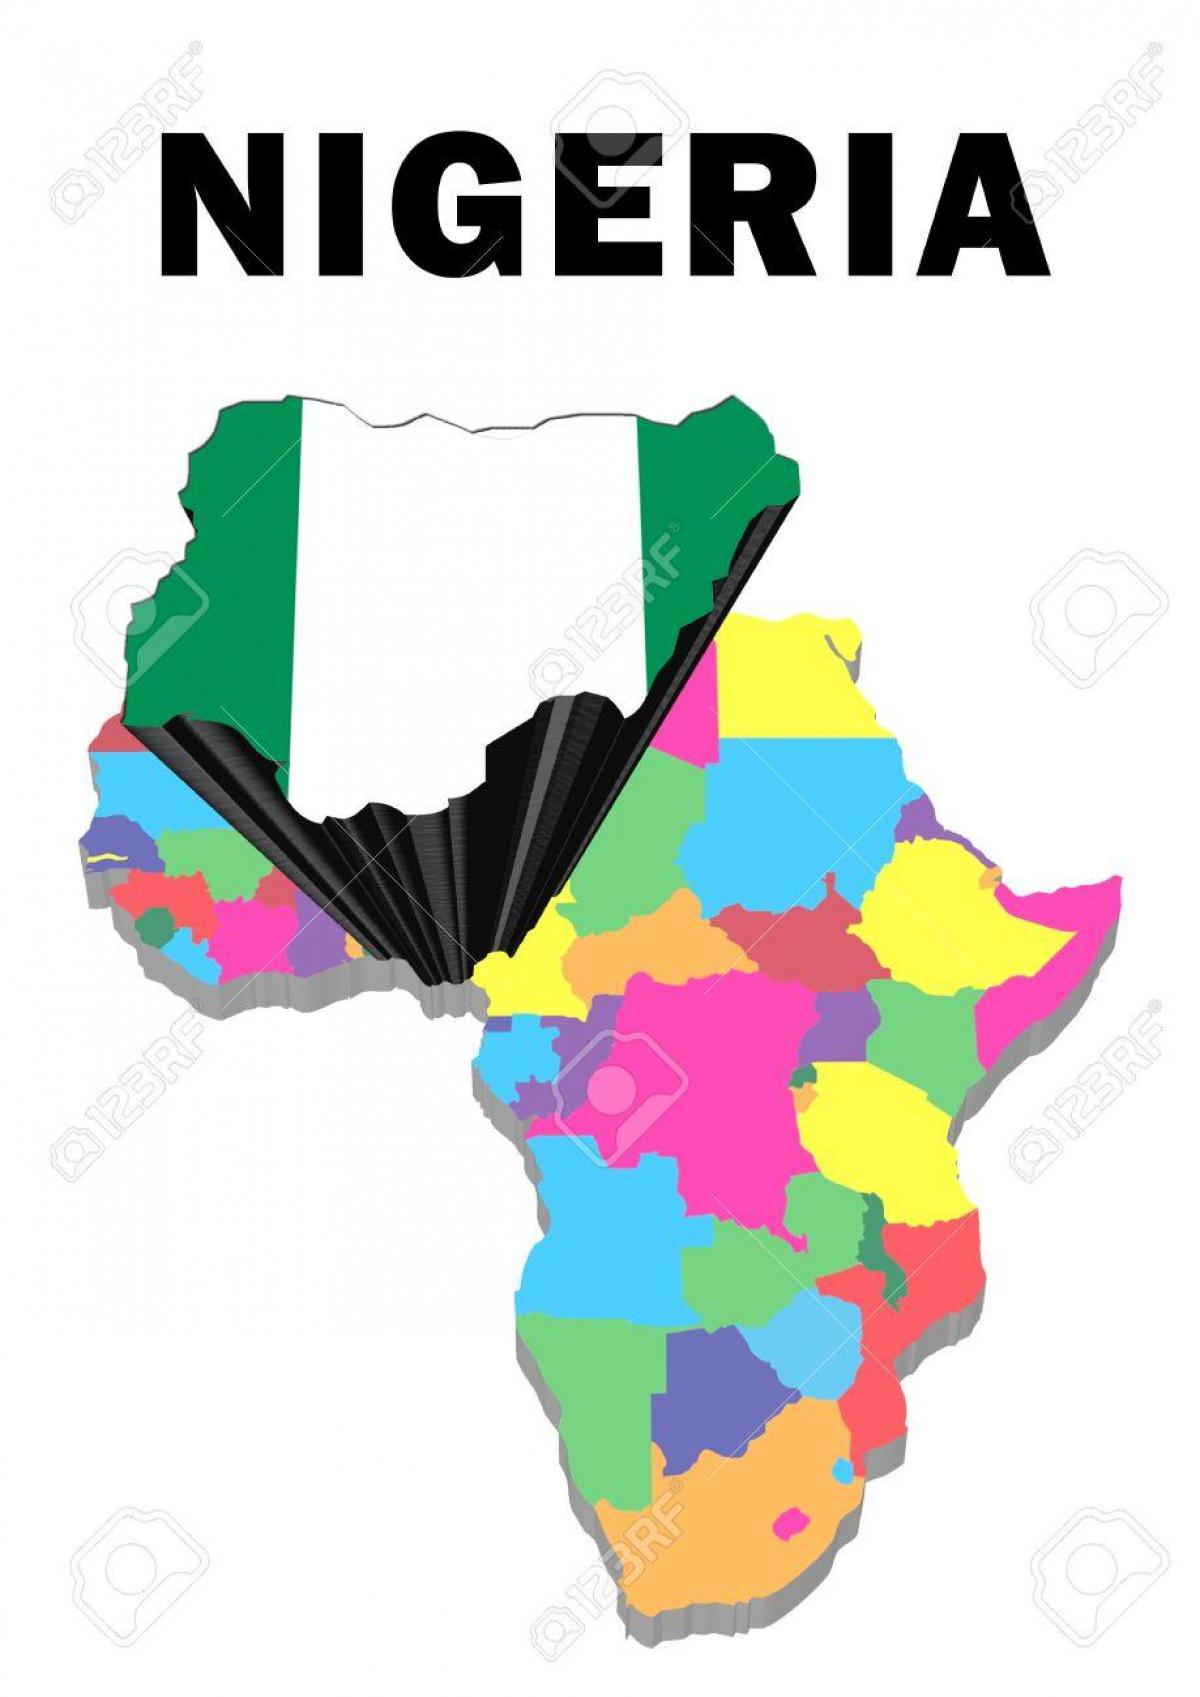 map of africa with nigeria highlighted